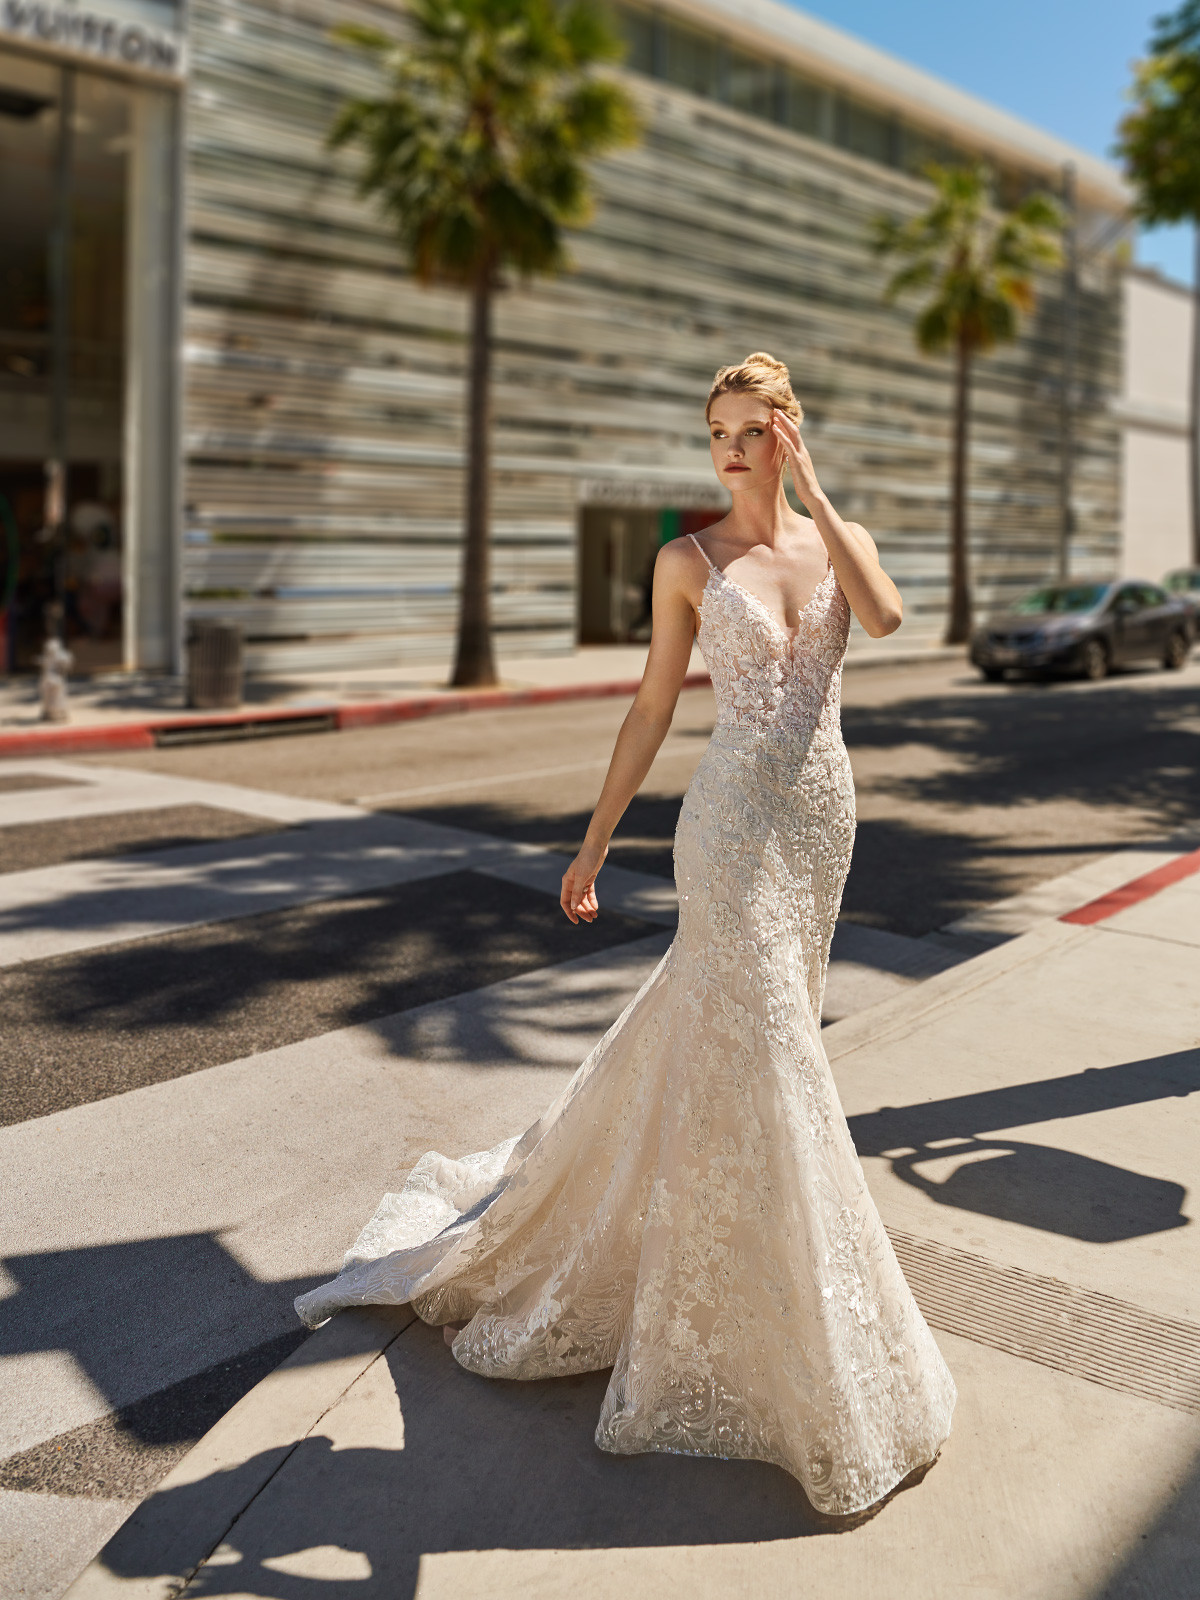 Find the Best Wedding Dress Style for your Figure